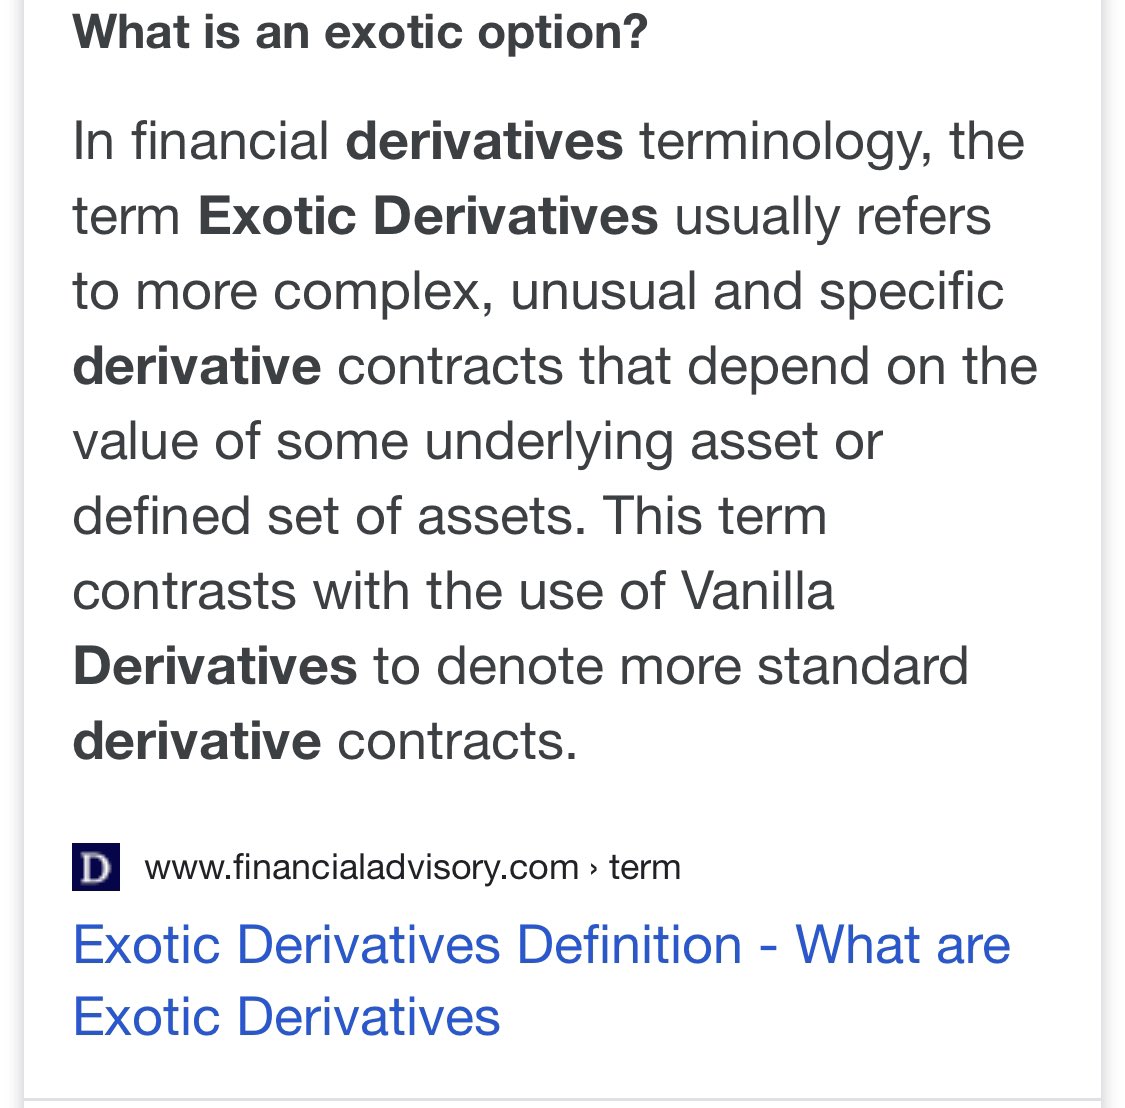 There are things that finance people came up with that are so convoluted they had to call them “exotic”